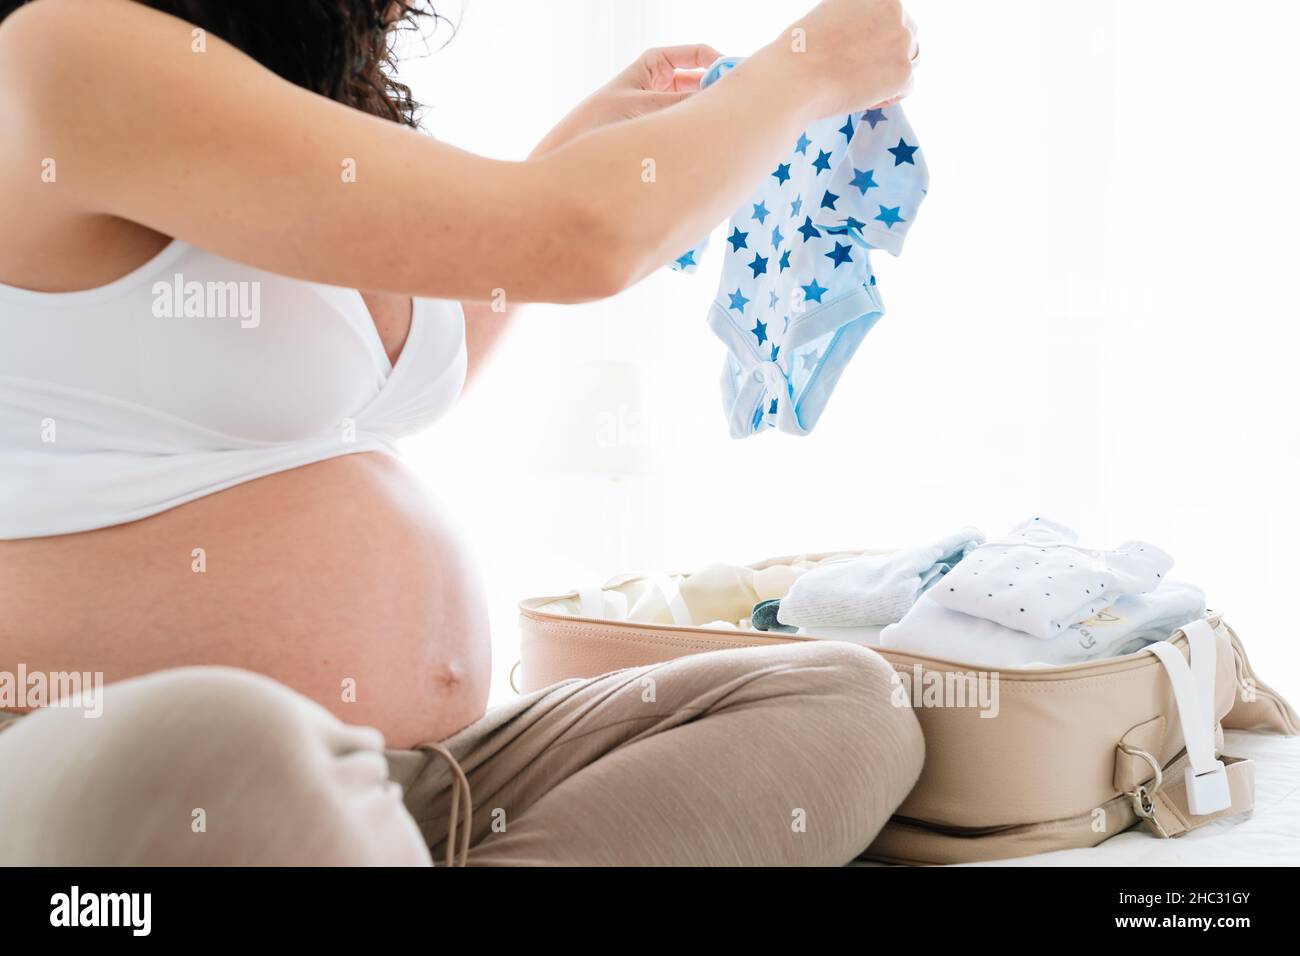 young pregnant woman preparing the baby's suitcase for the hospital folding and putting away the little clothes for her newborn Stock Photo